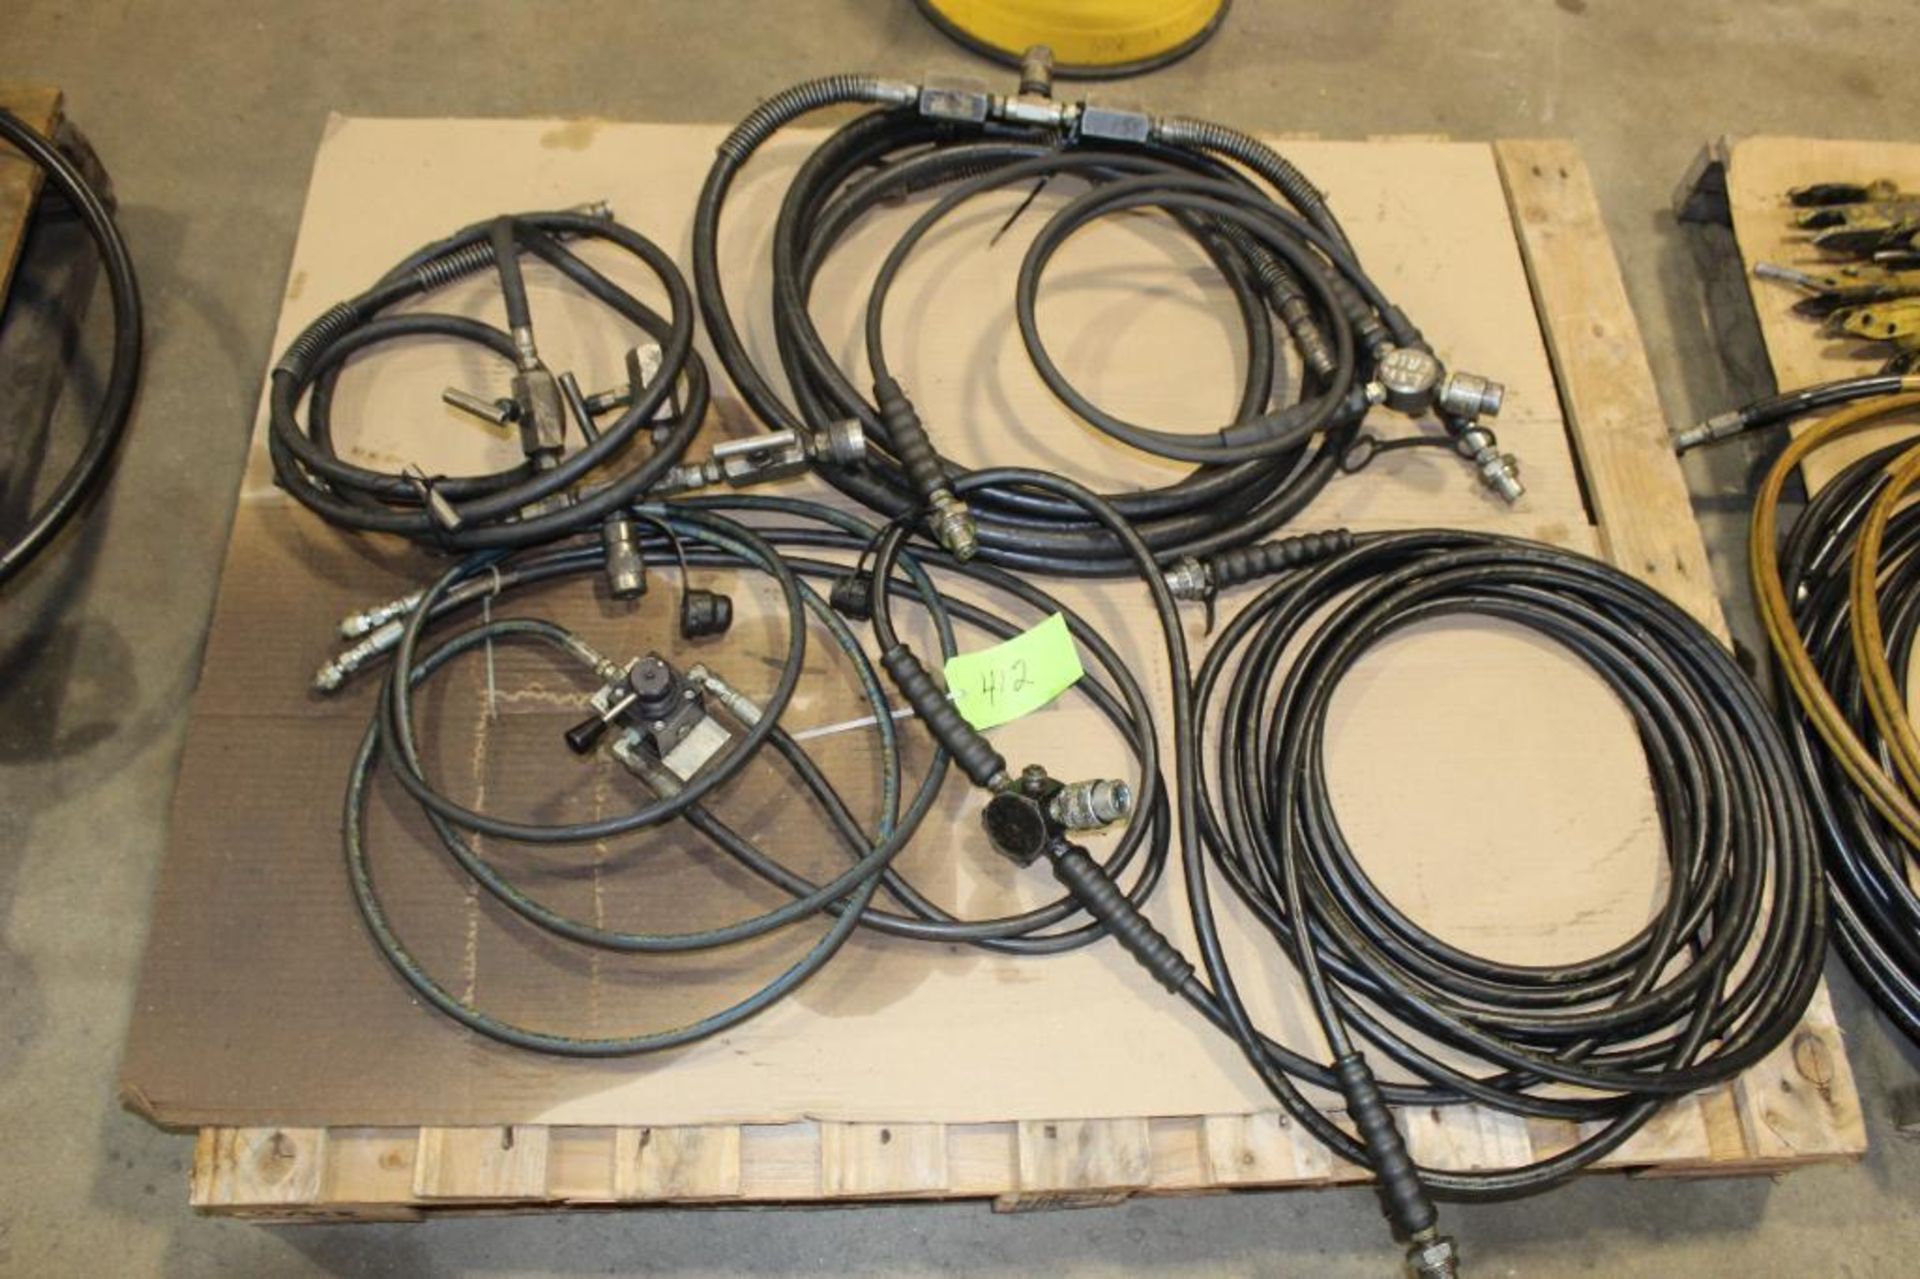 Lot of (5) Enterpac Hoses For Hydraulic Pumps w/ Splitters and Directional Valves